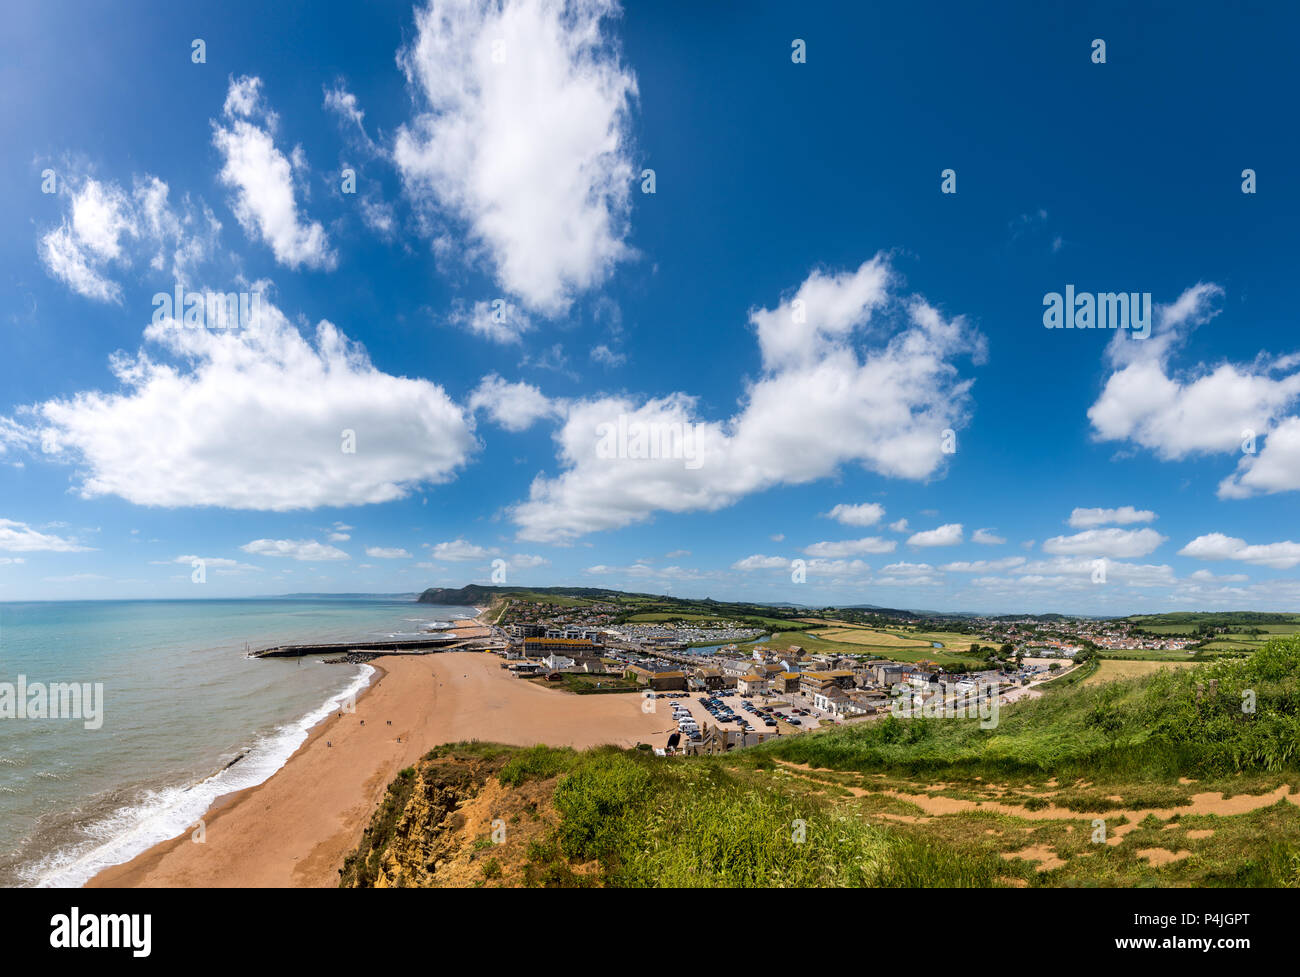 BRIDPORT, DORSET, UK - 6JUN2018: West Bay from cliffs to the East. Inland, the town of Bridport can also be seen. Stock Photo